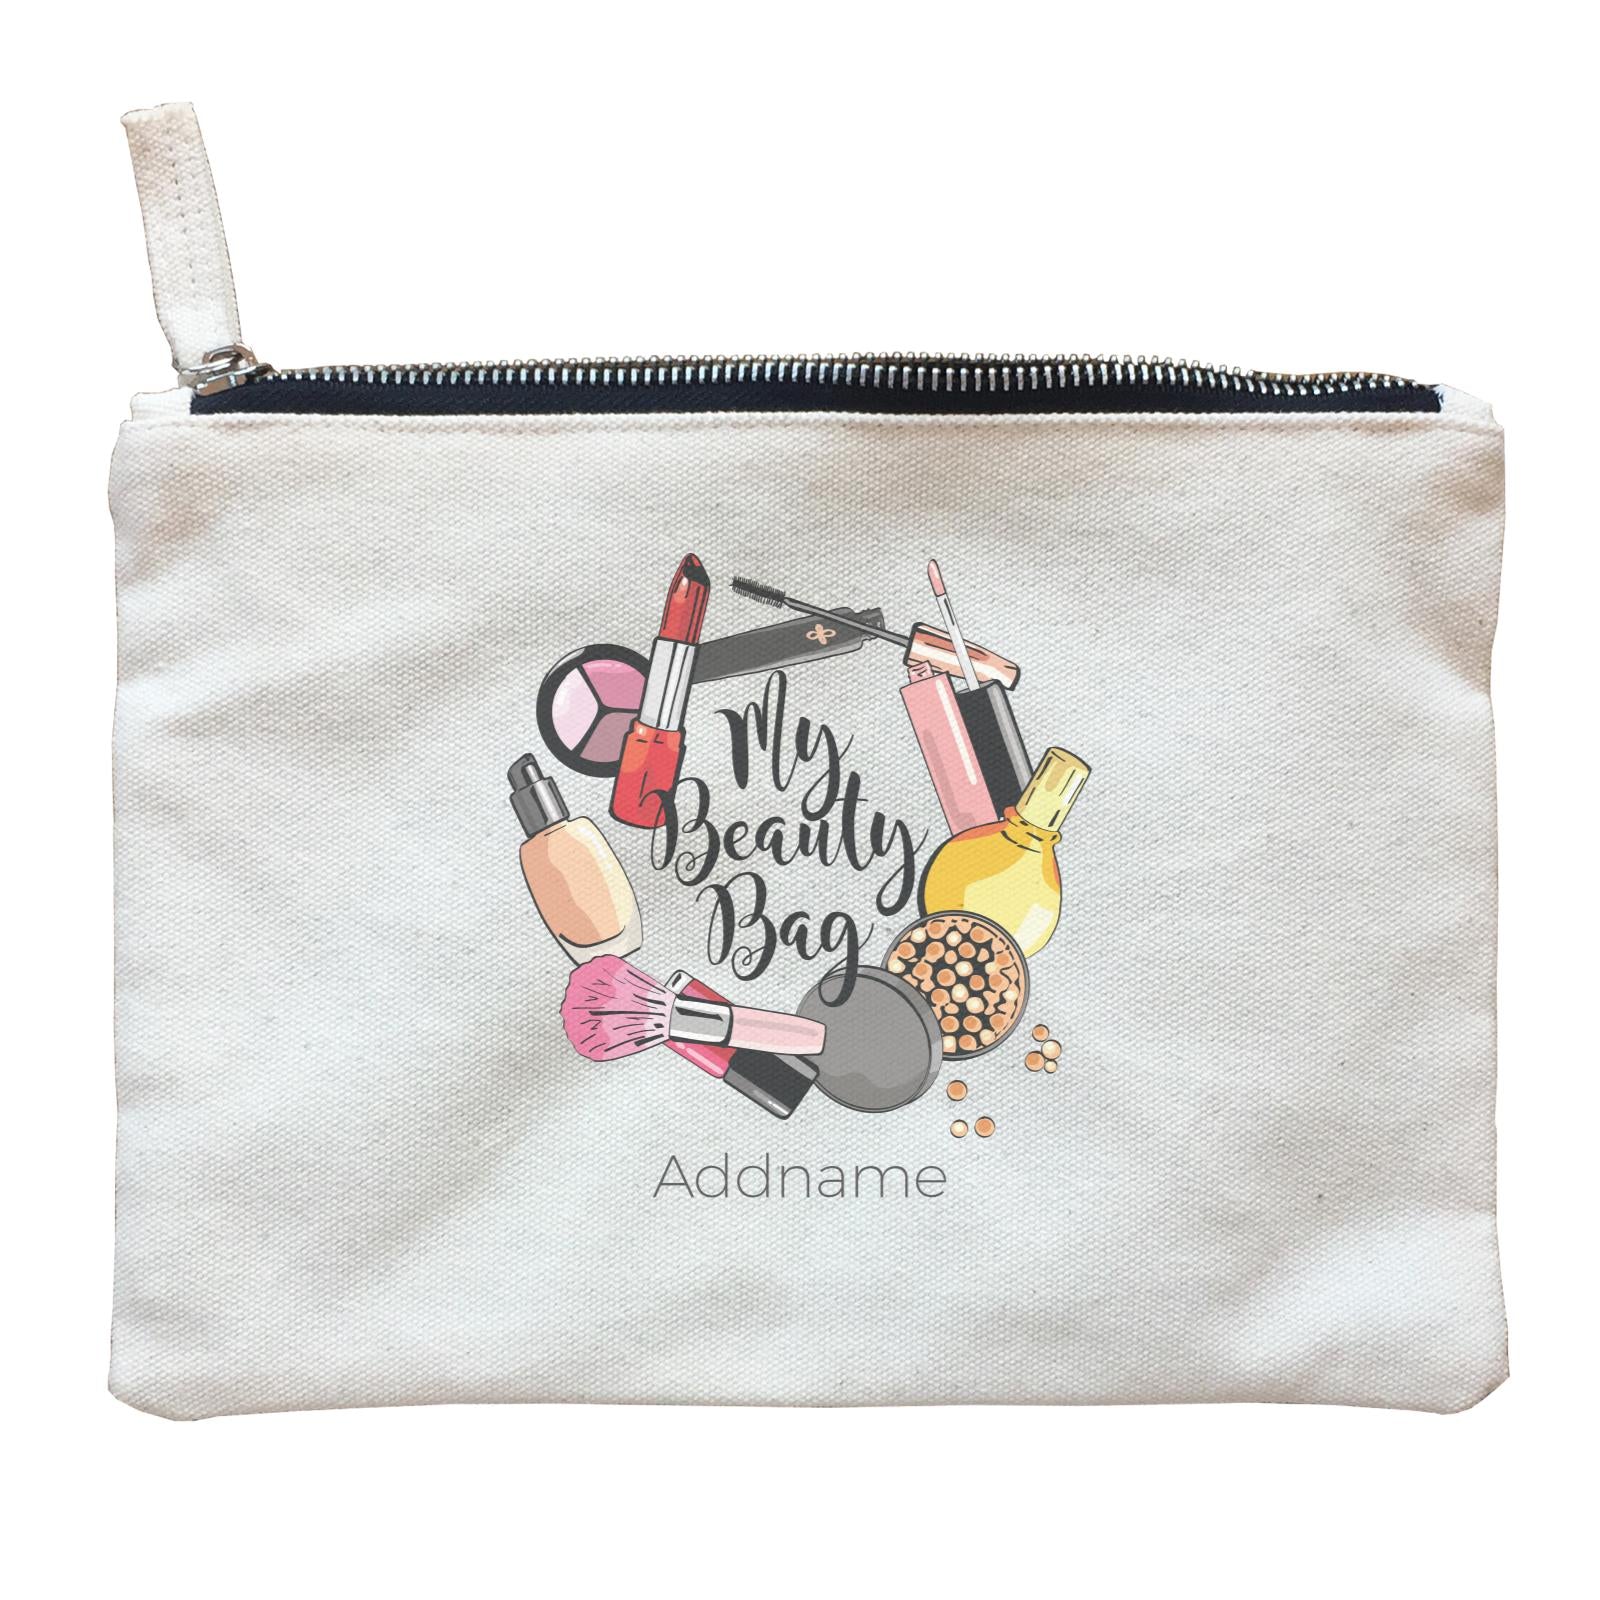 Make Up Quotes Make My Beauty Bag Addname Zipper Pouch